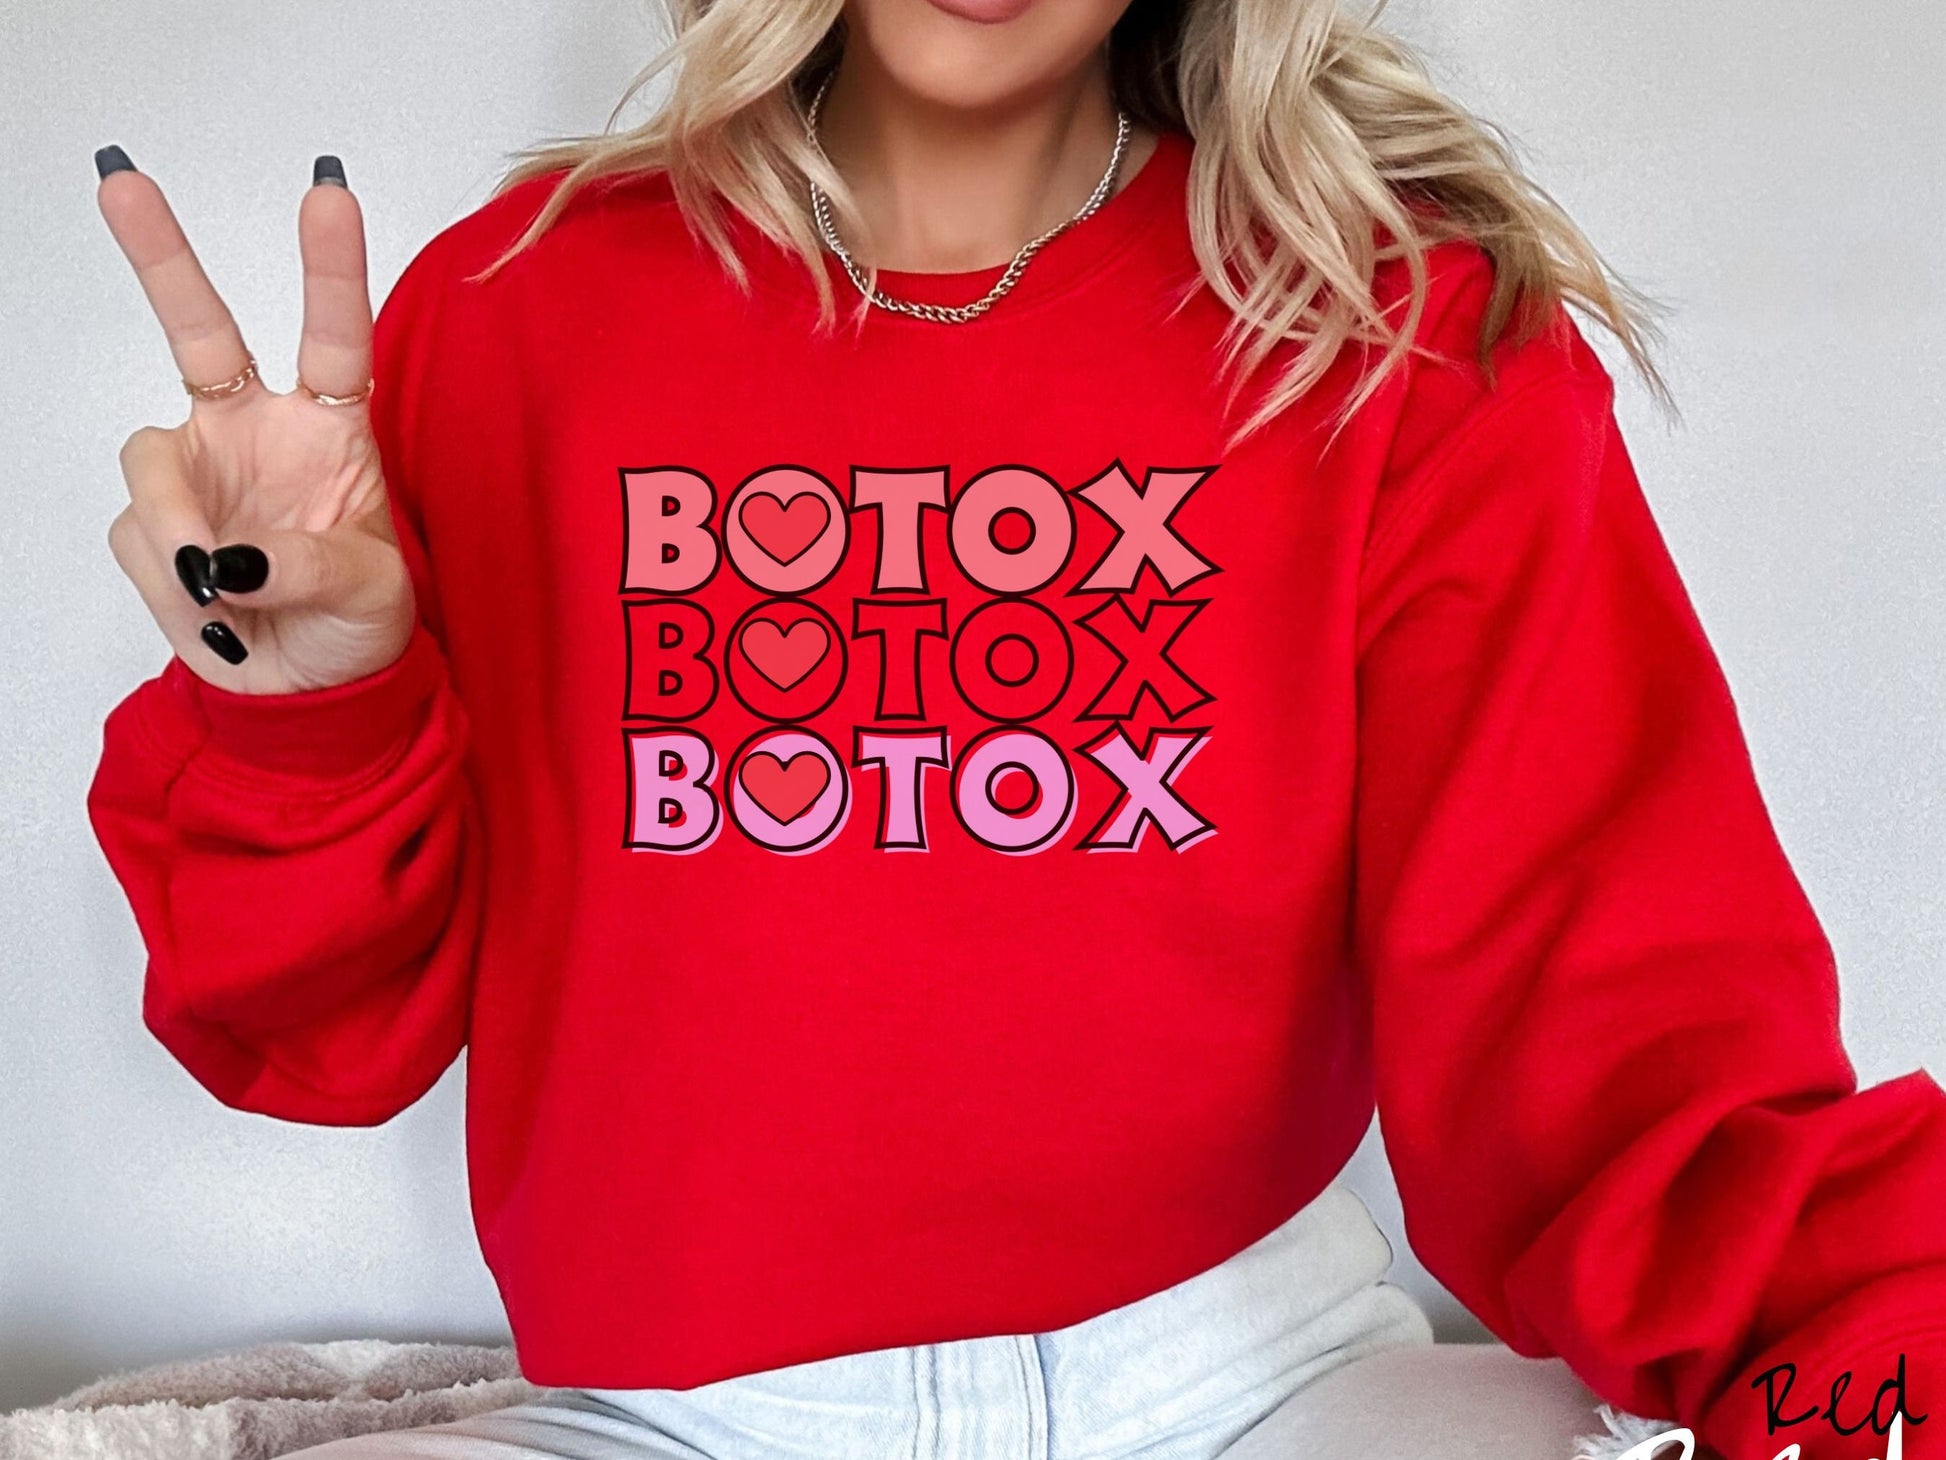 A woman wearing a cute red colored sweatshirt with the word Botox listed three times in different shades of pink and red, with red hearts inside the first letter O in Botox.